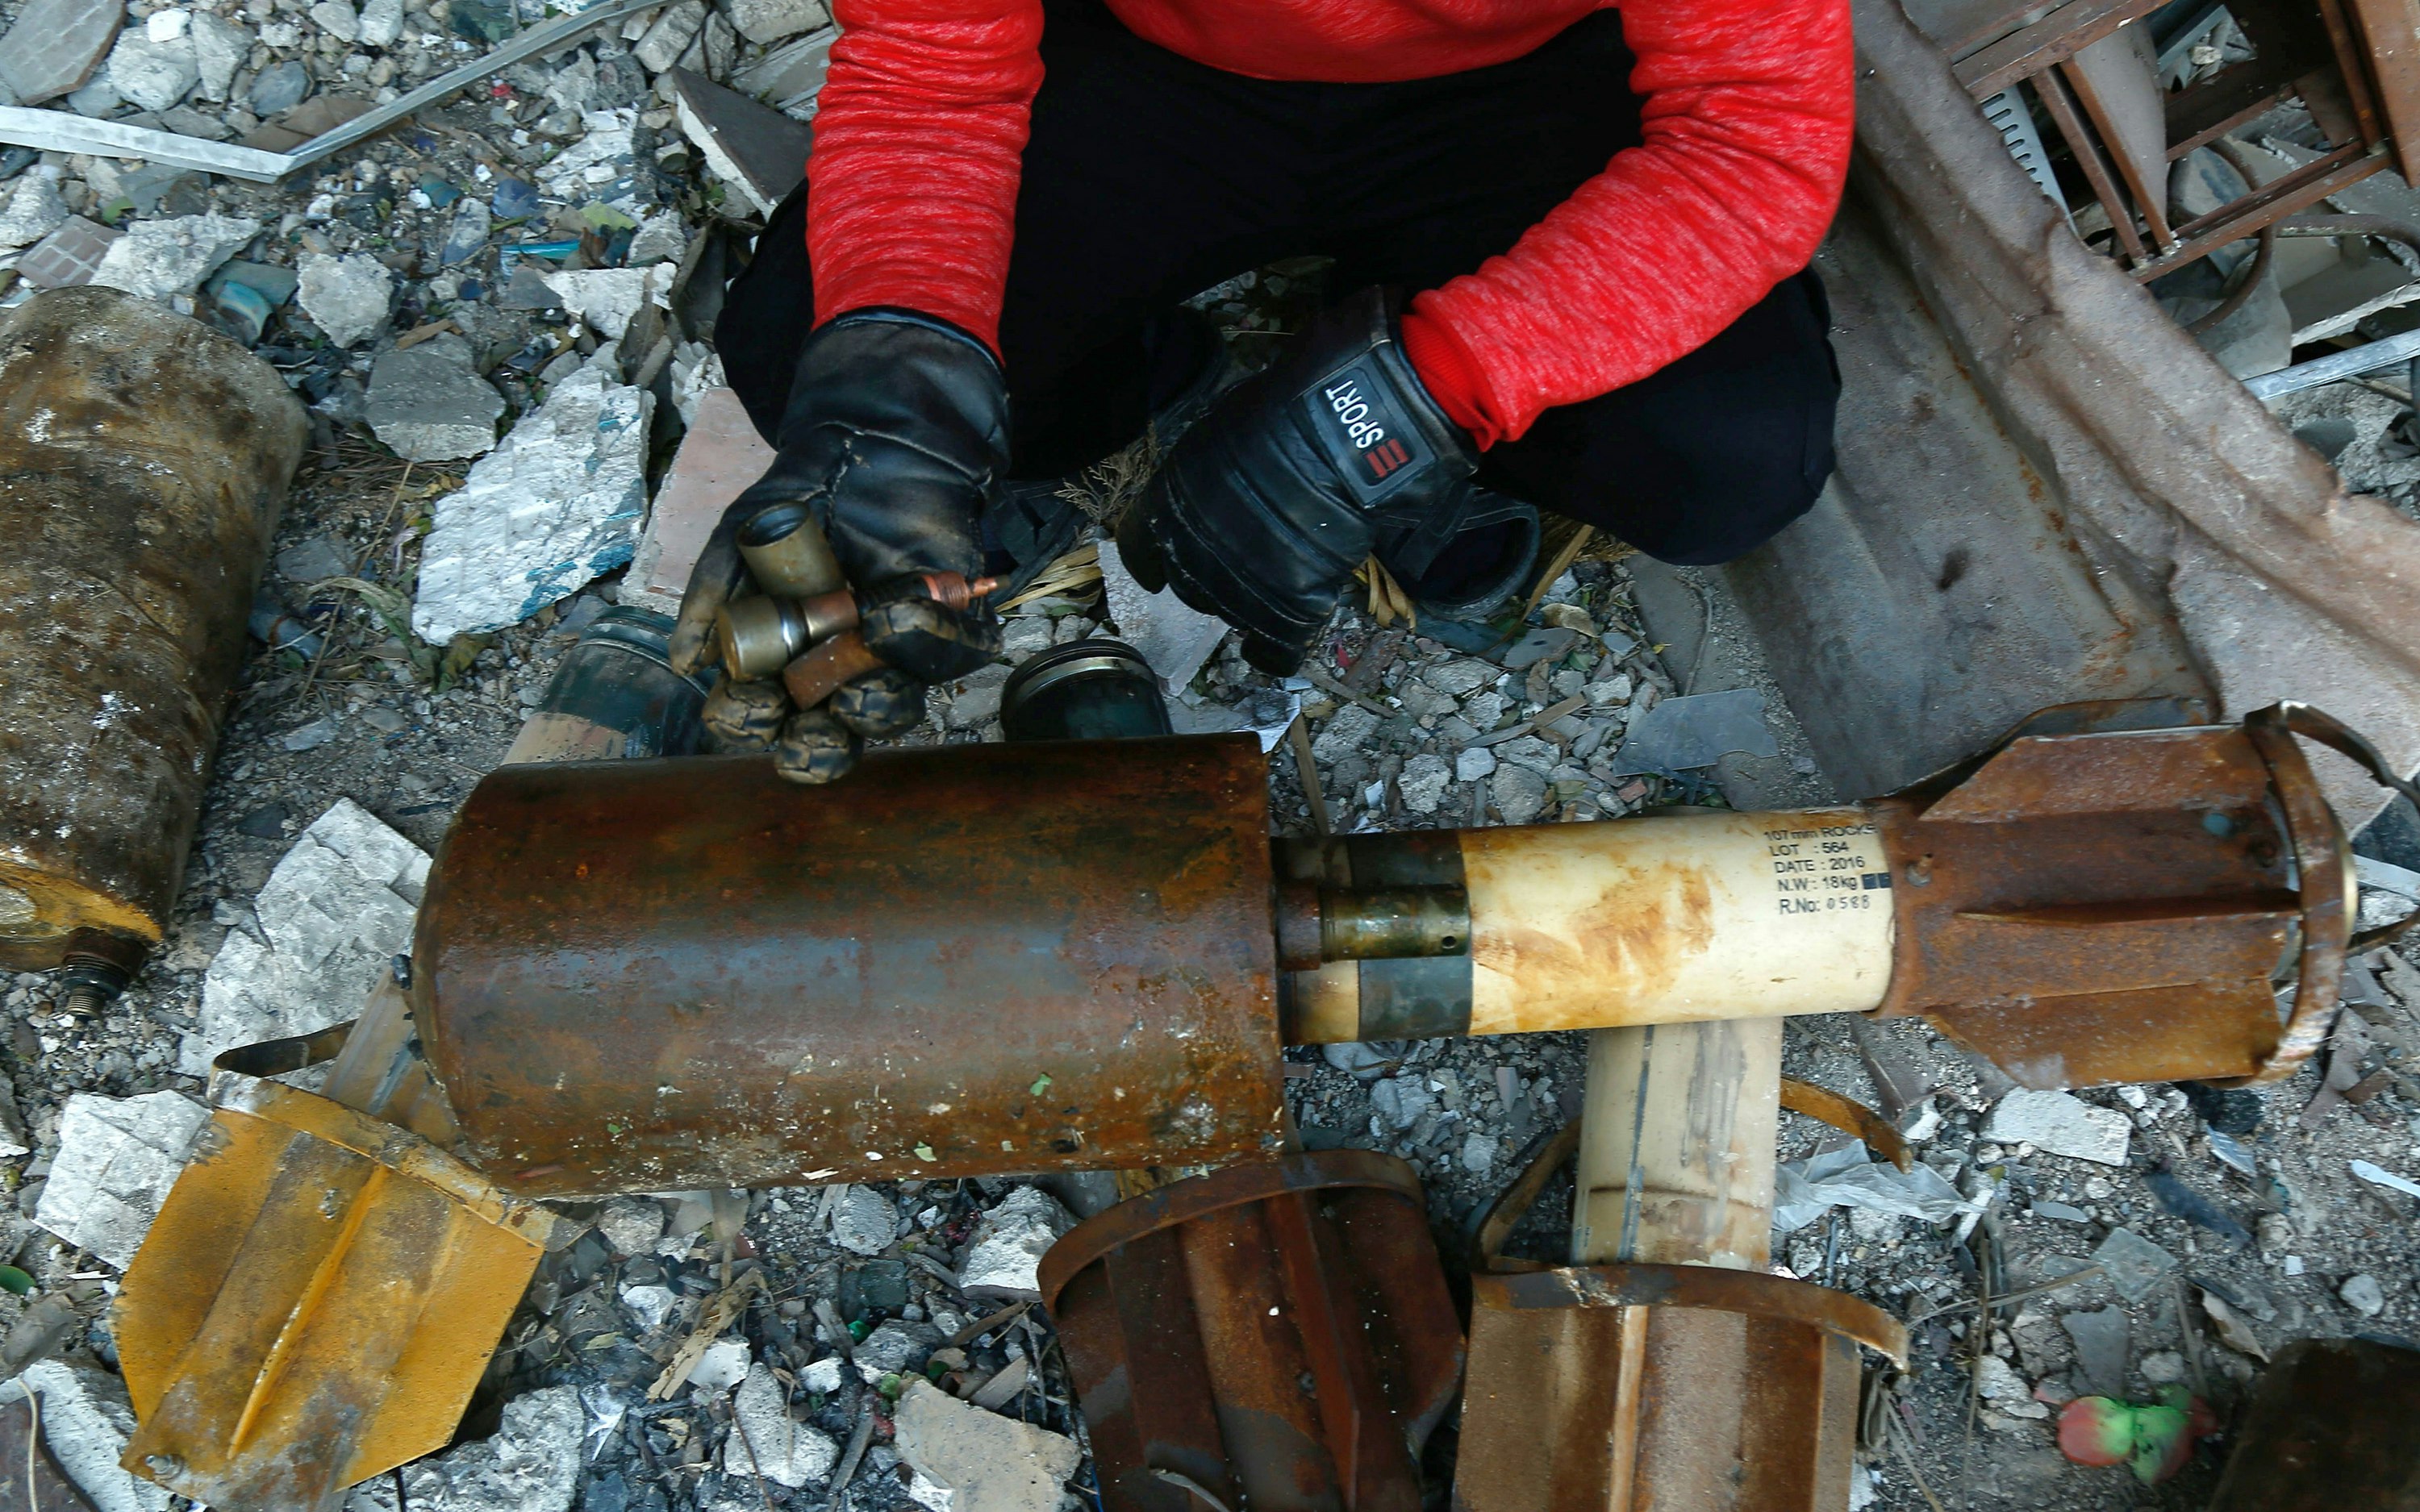 A person next to debris and bomb parts